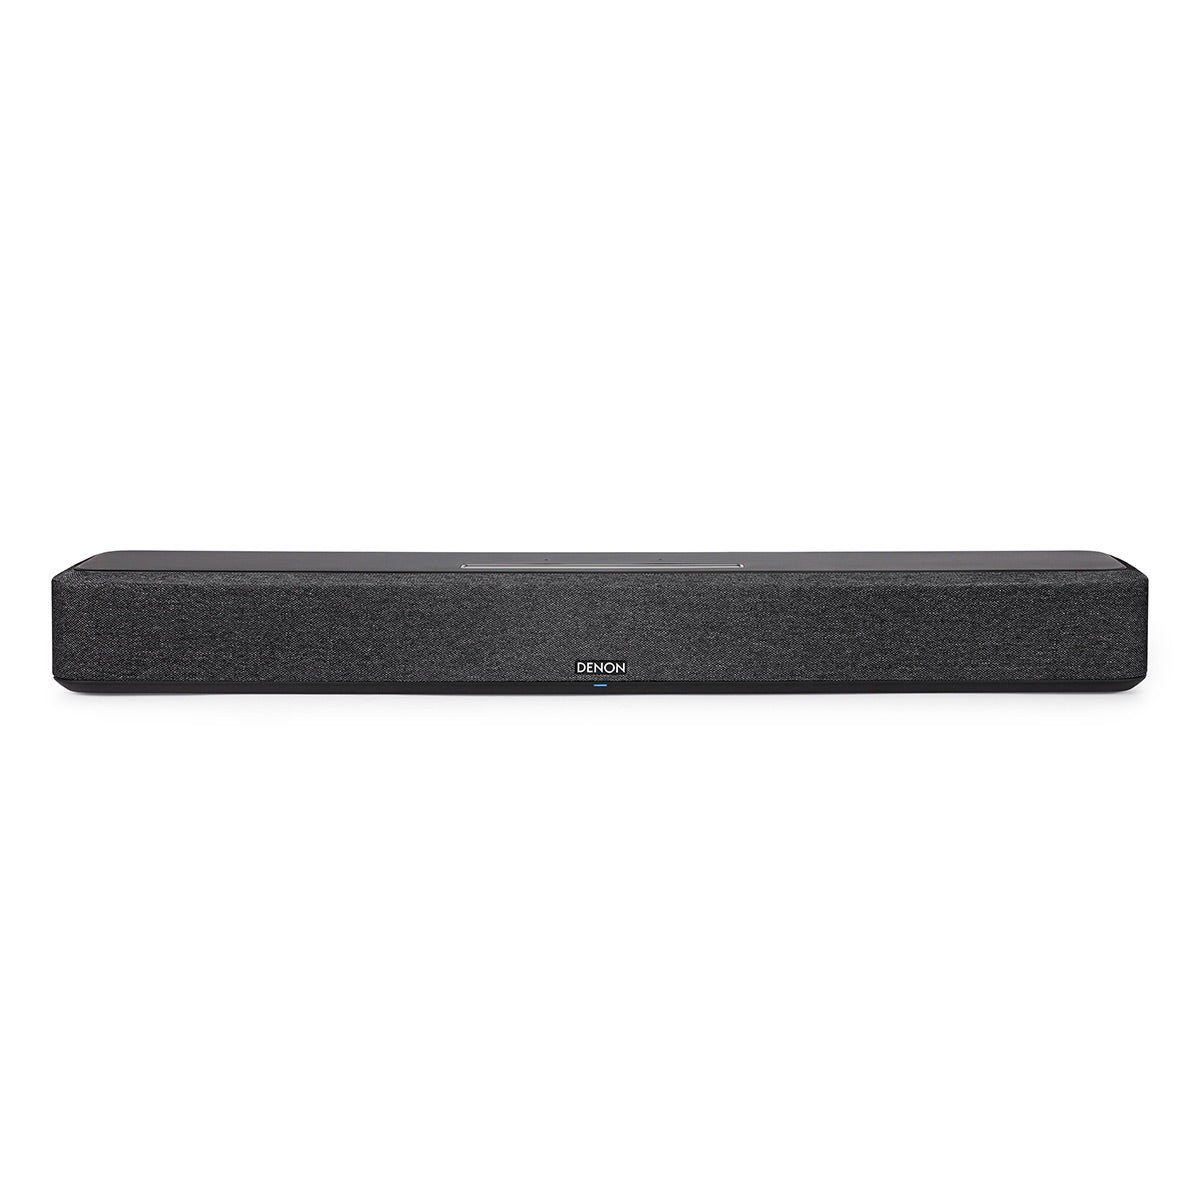 Denon Home Sound Bar 550 with Home 150 Wireless Streaming Speakers (Black)